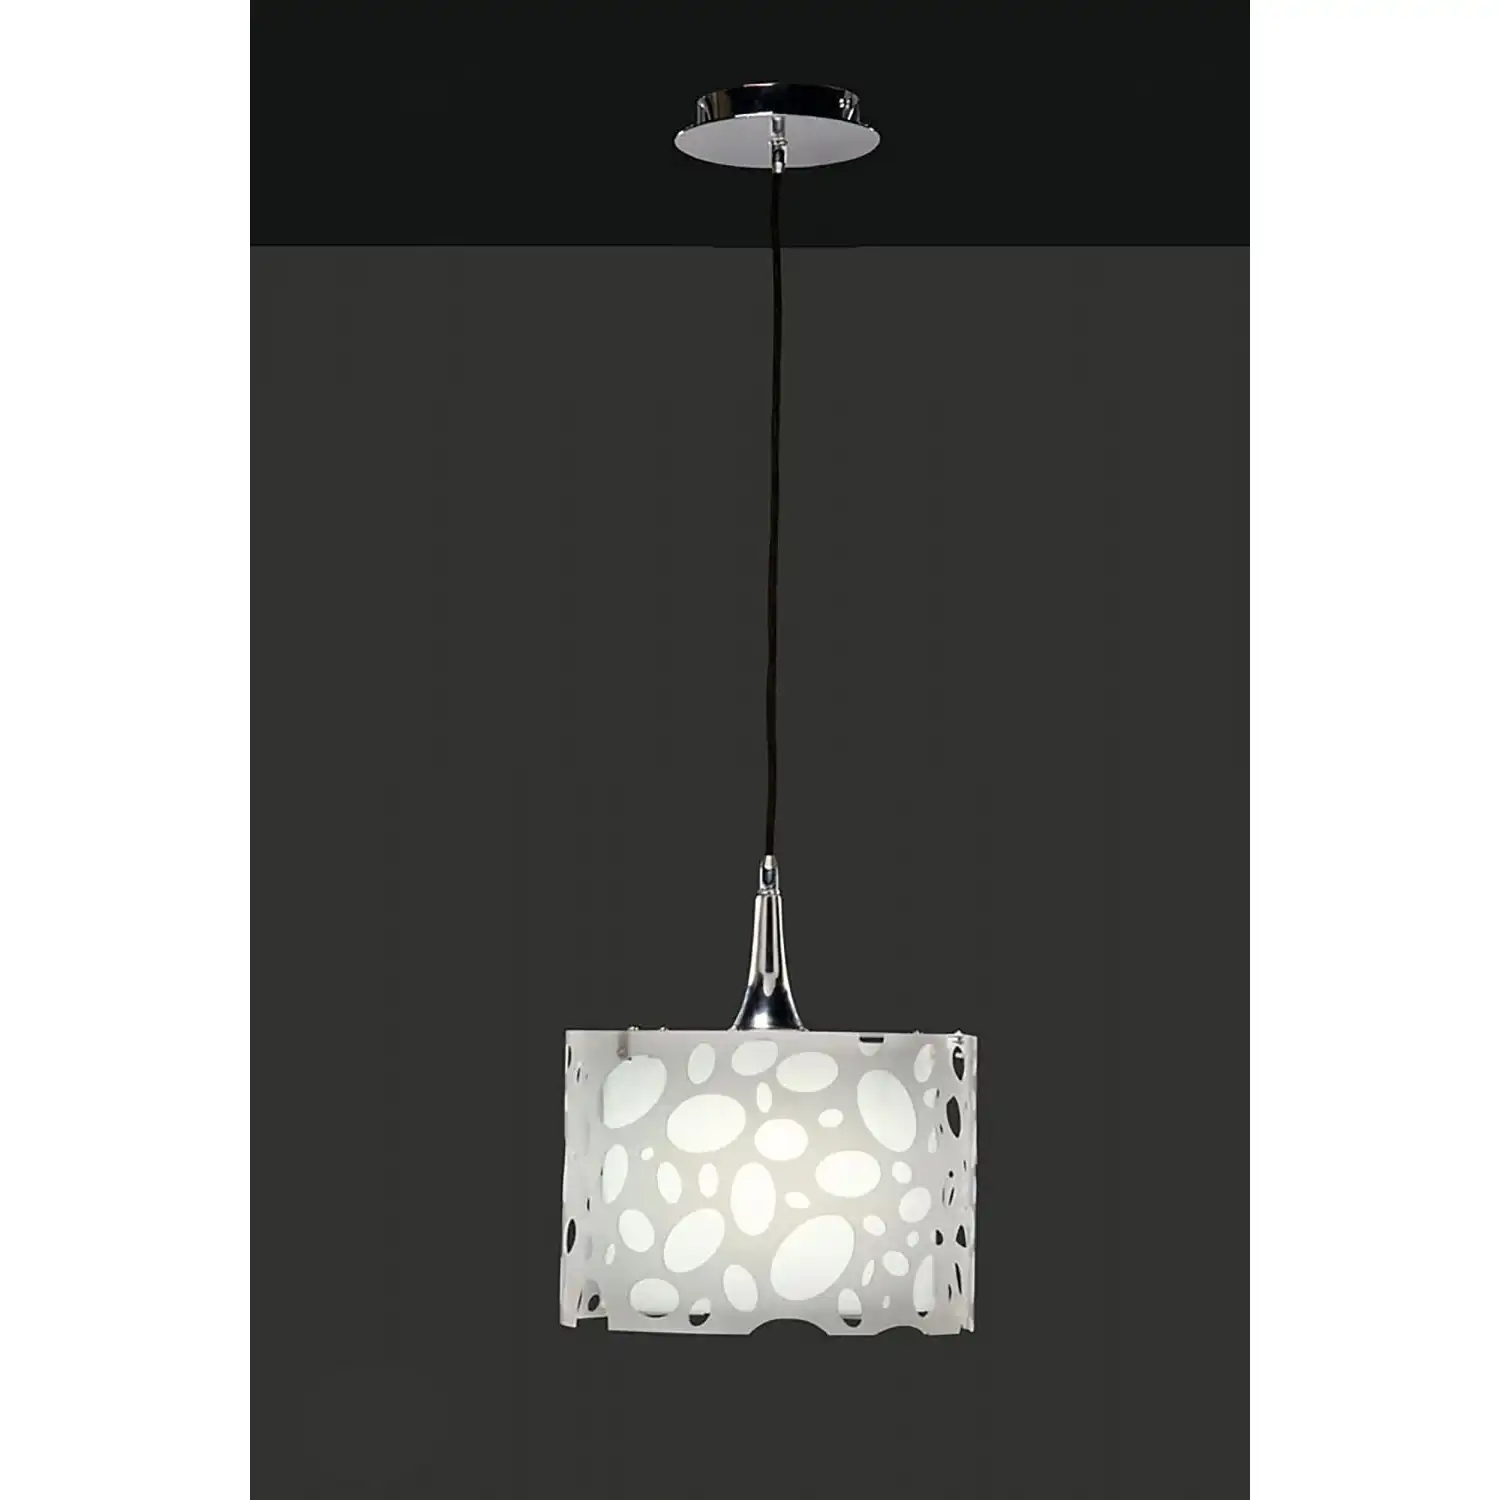 Lupin Pendant 1 Light E27, Gloss White White Acrylic Polished Chrome, CFL Lamps INCLUDED